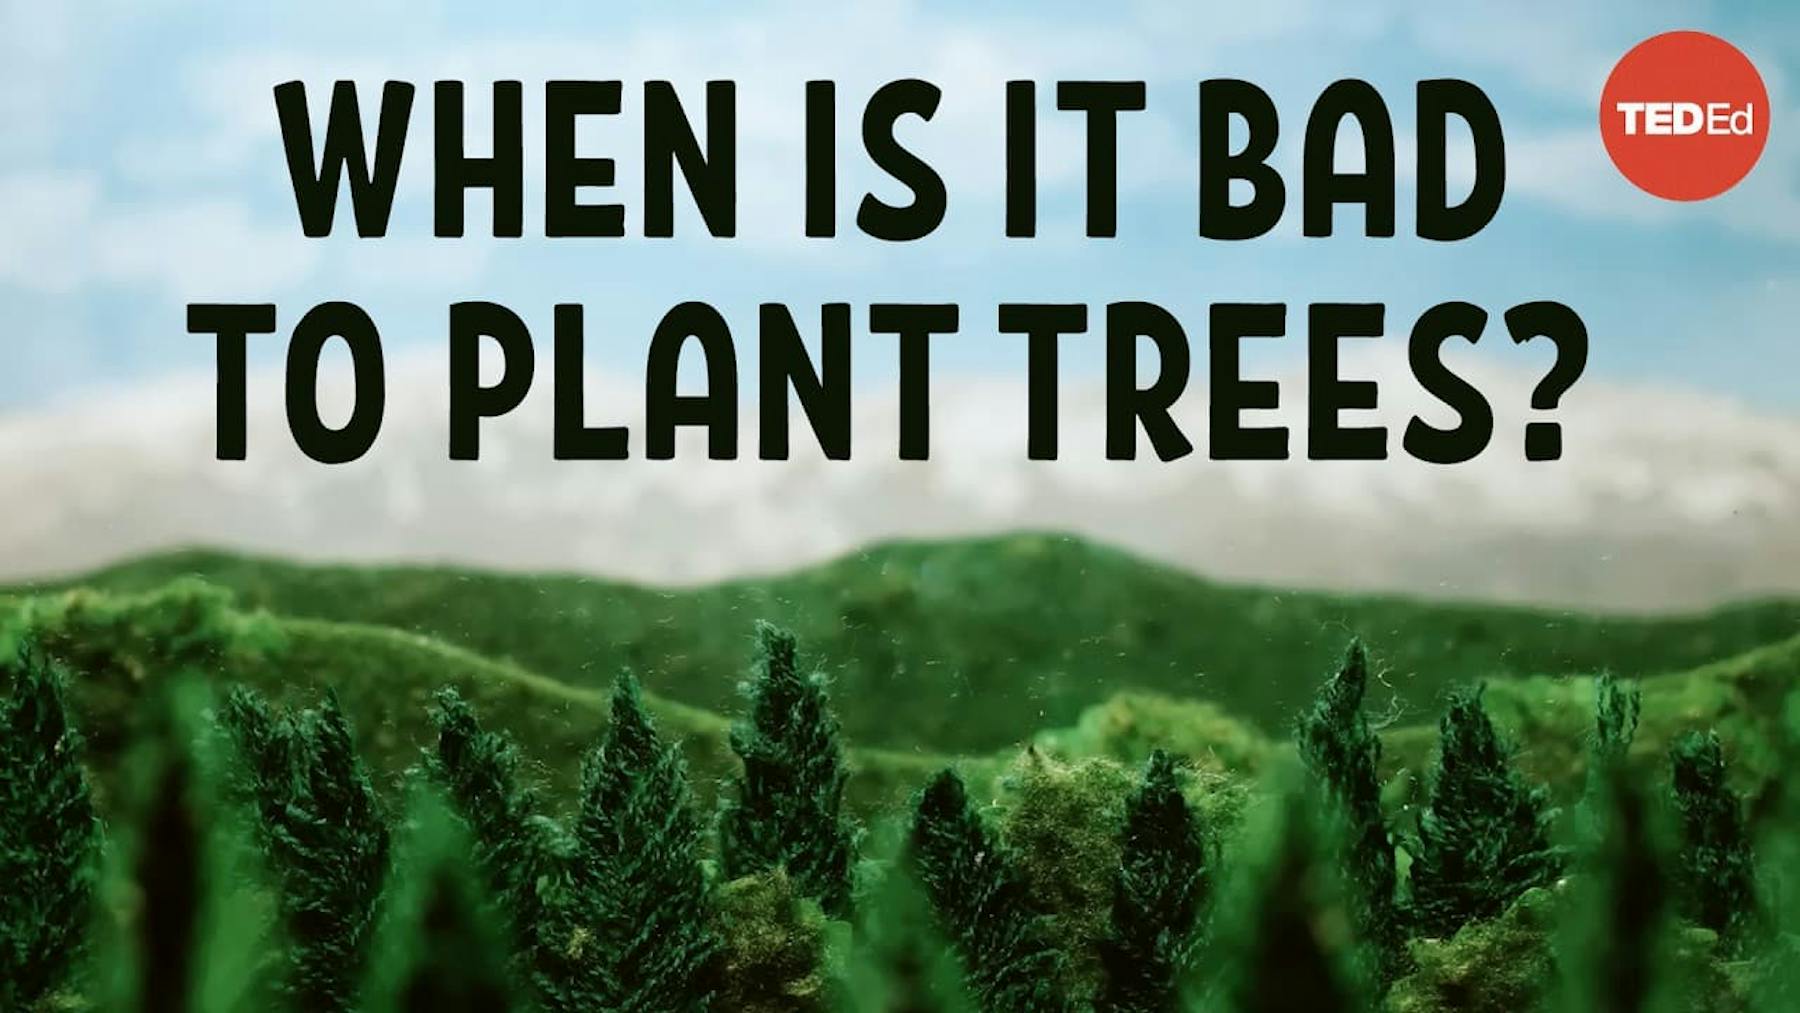 when is it bad to plant trees?